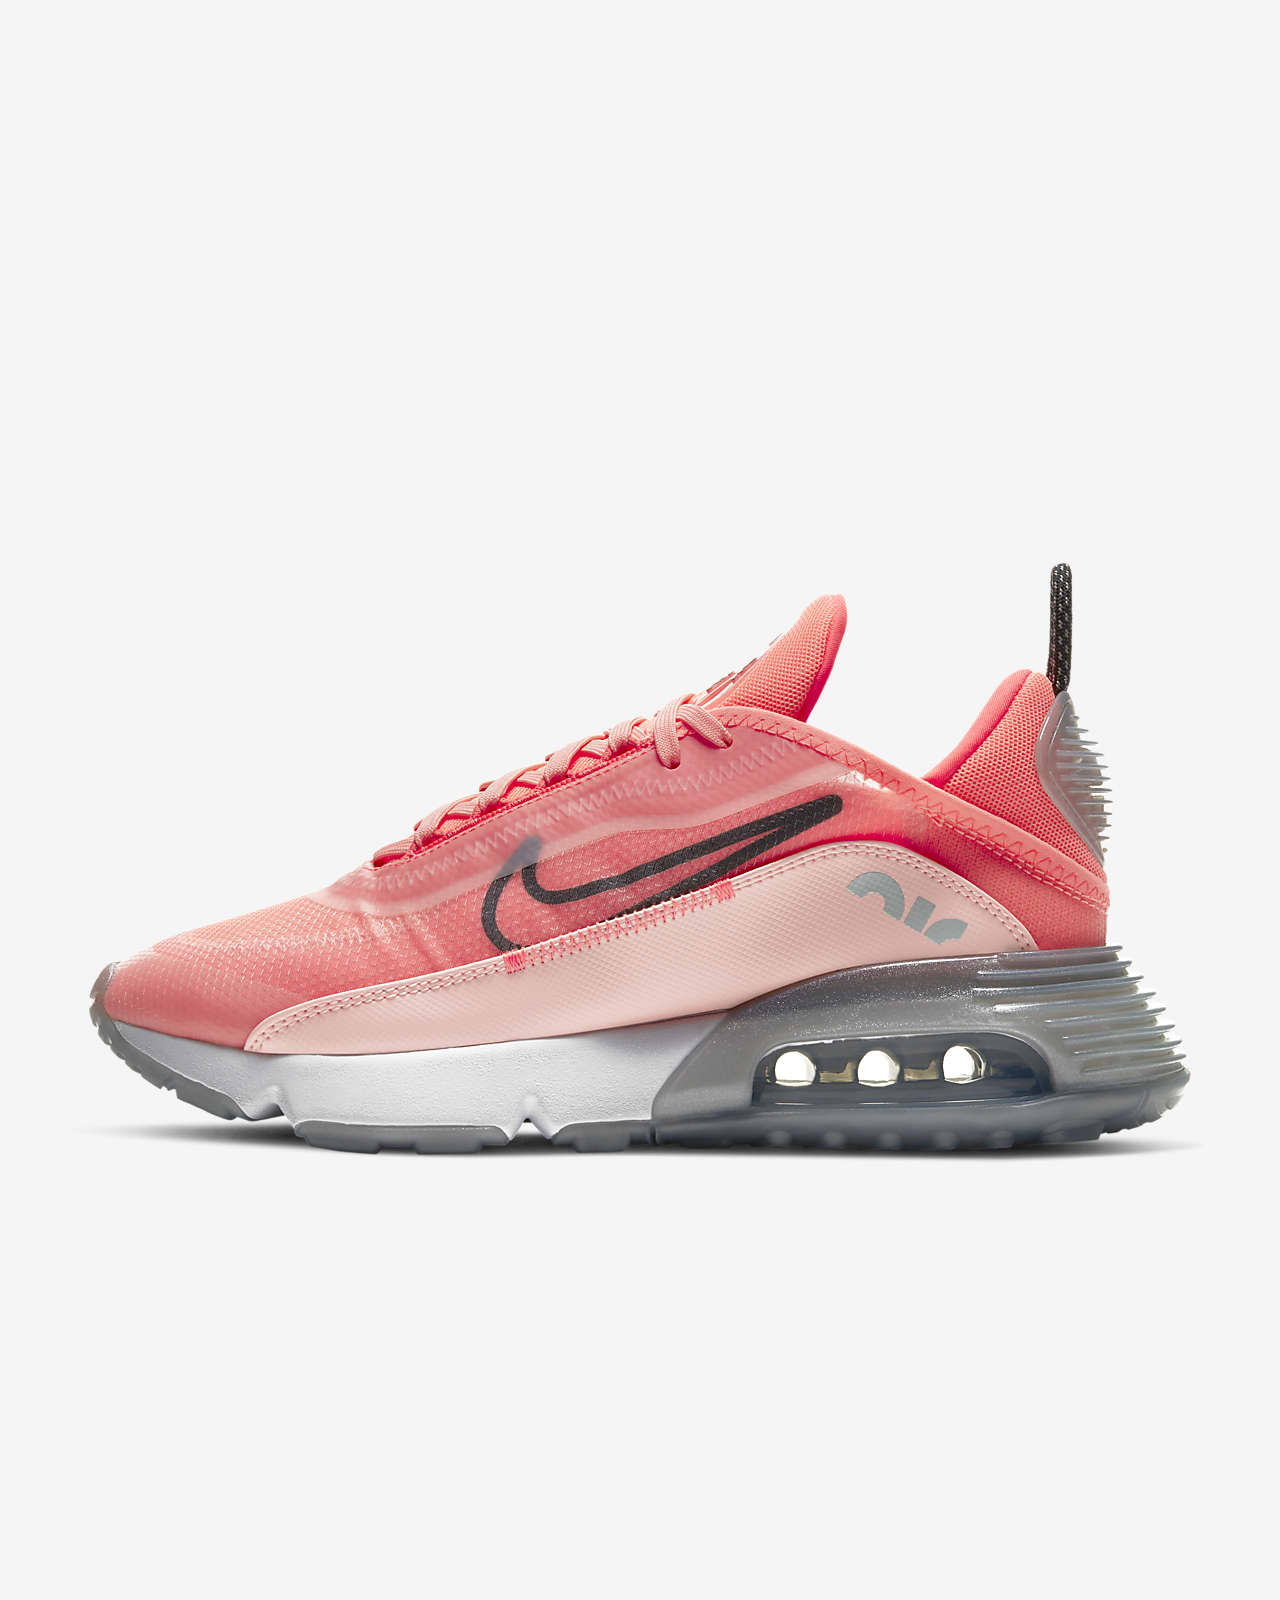 air max shoes for girls